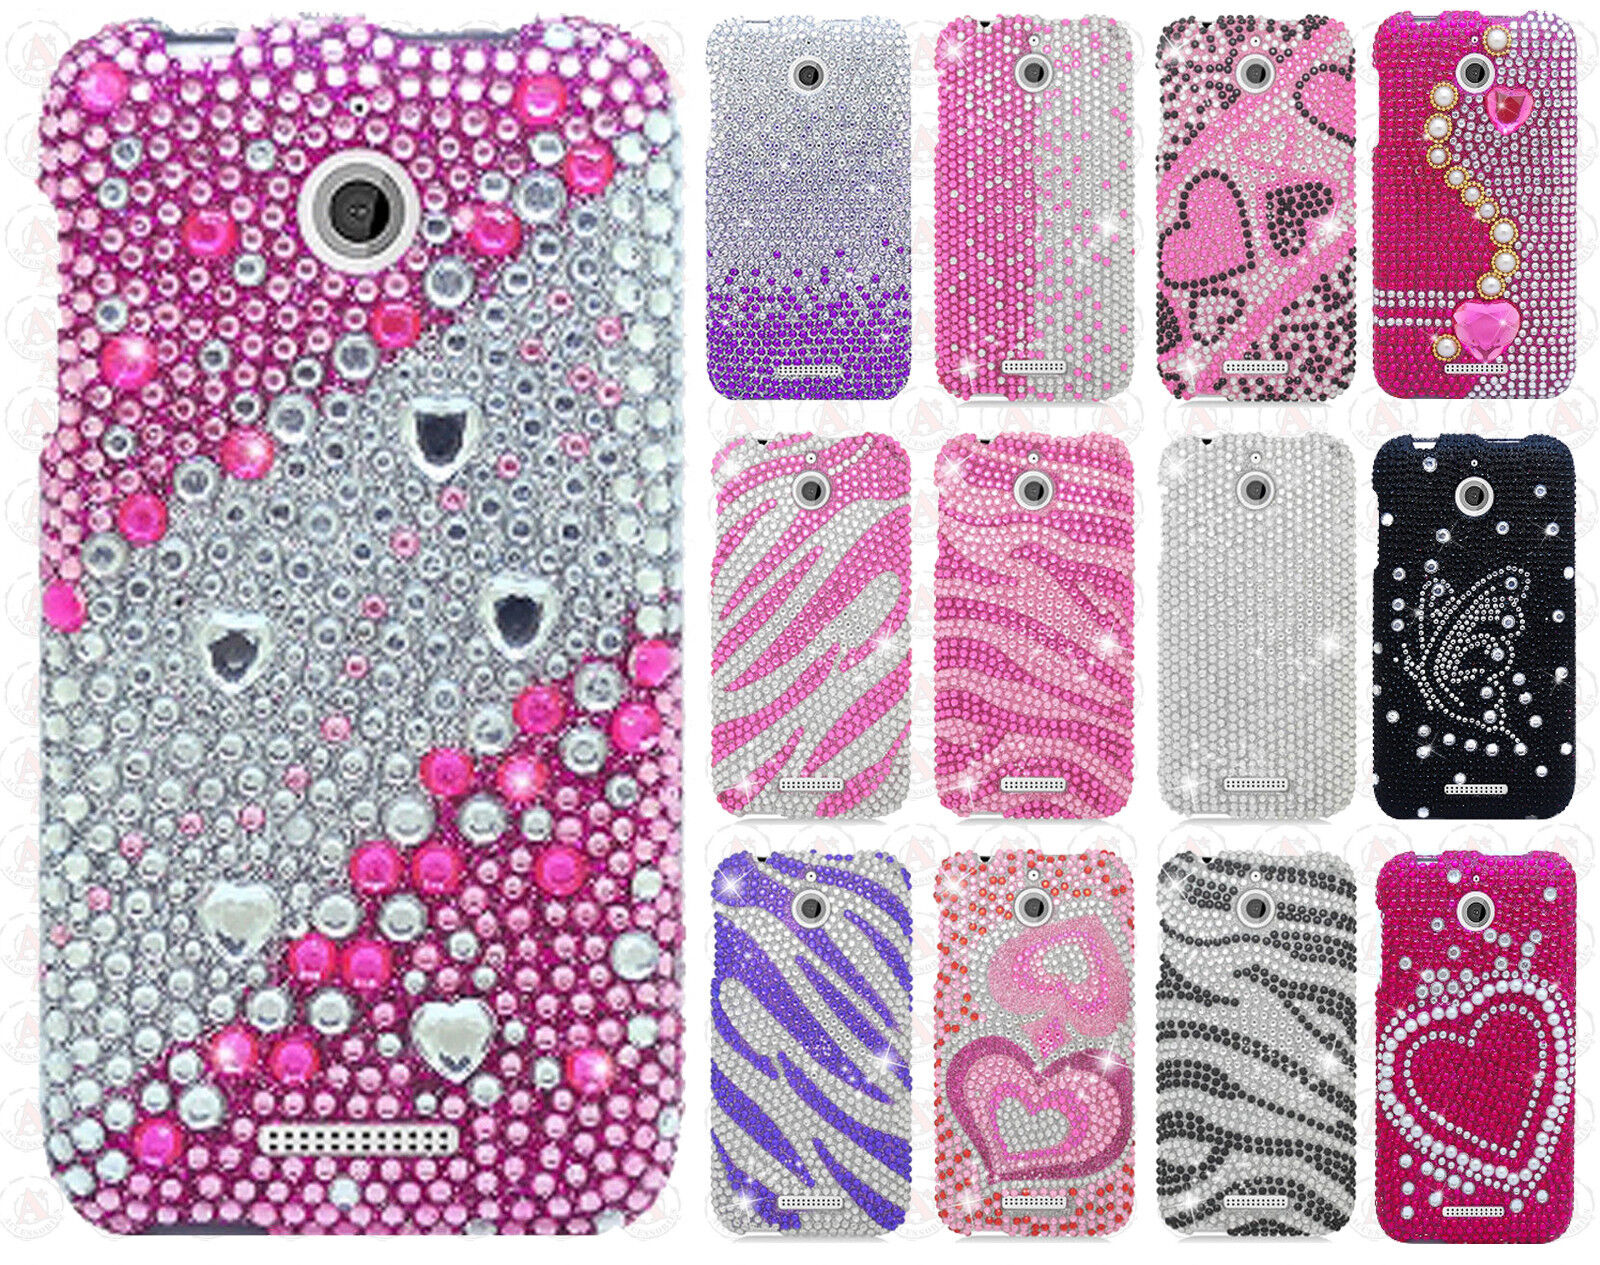 For HTC Desire 510 Crystal Diamond BLING Hard Case Snap On Phone Cover Accessory Generic Does not apply